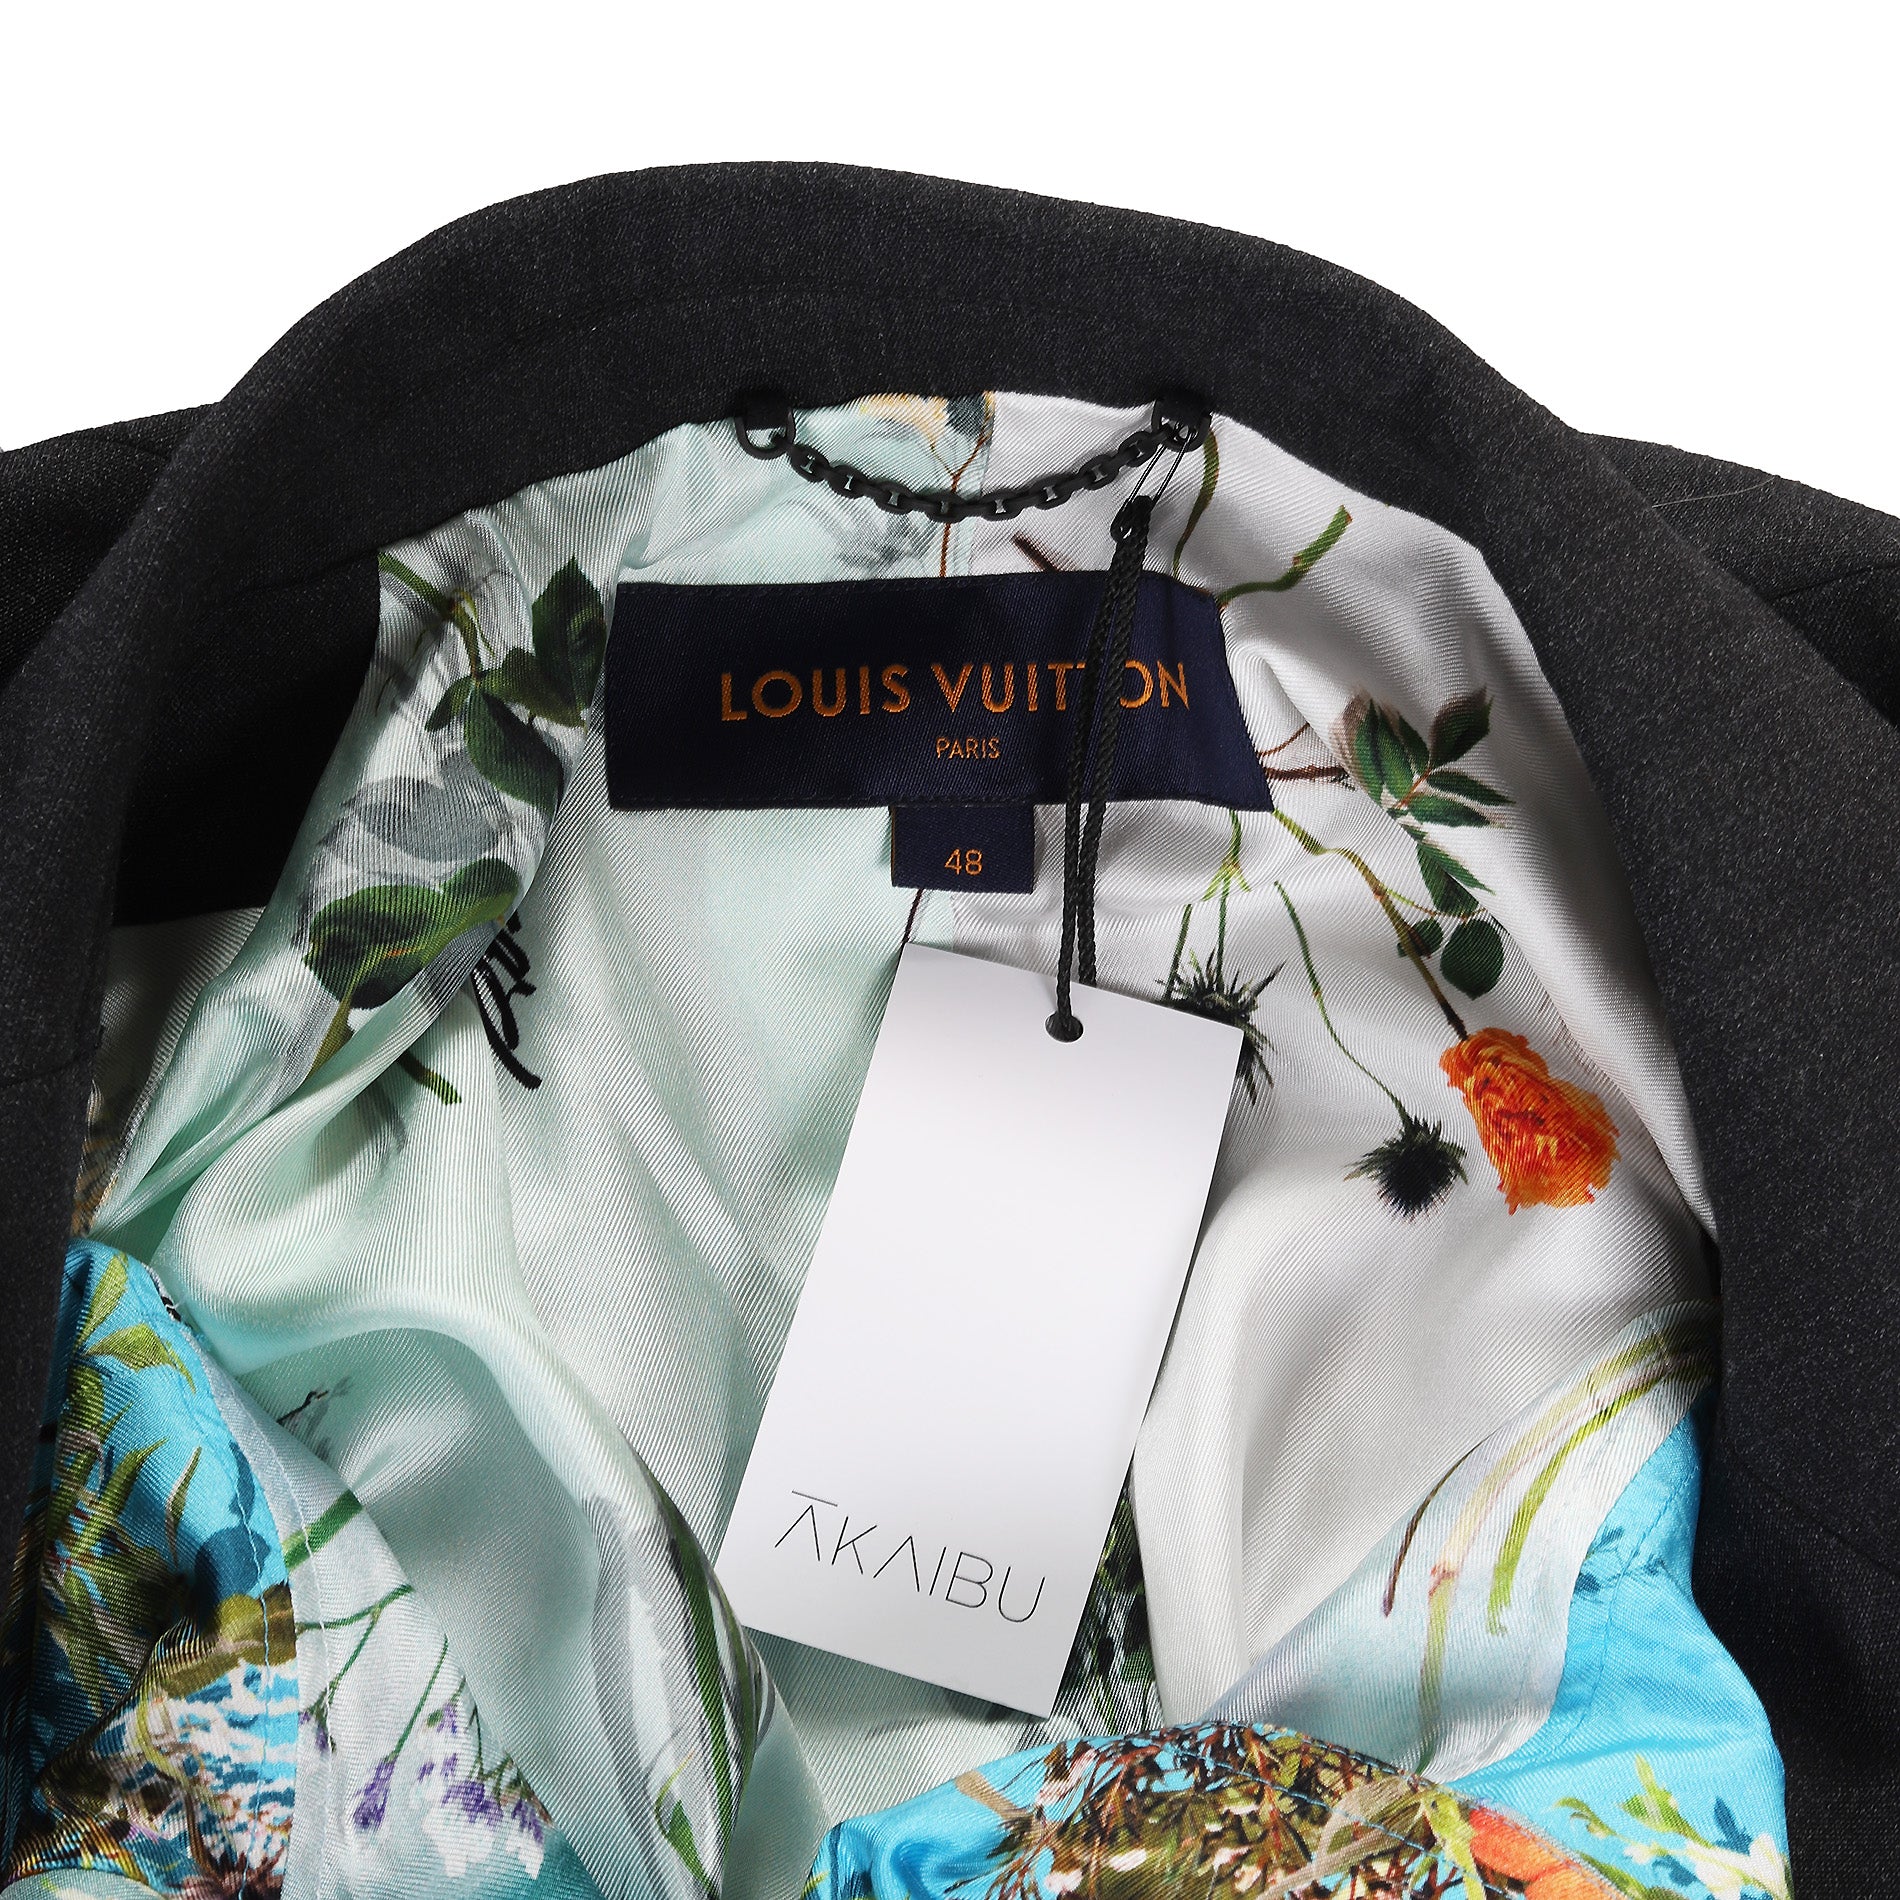 Louis Vuitton SS2021 Sample Runway 2 in 1 Shirt and Jacket